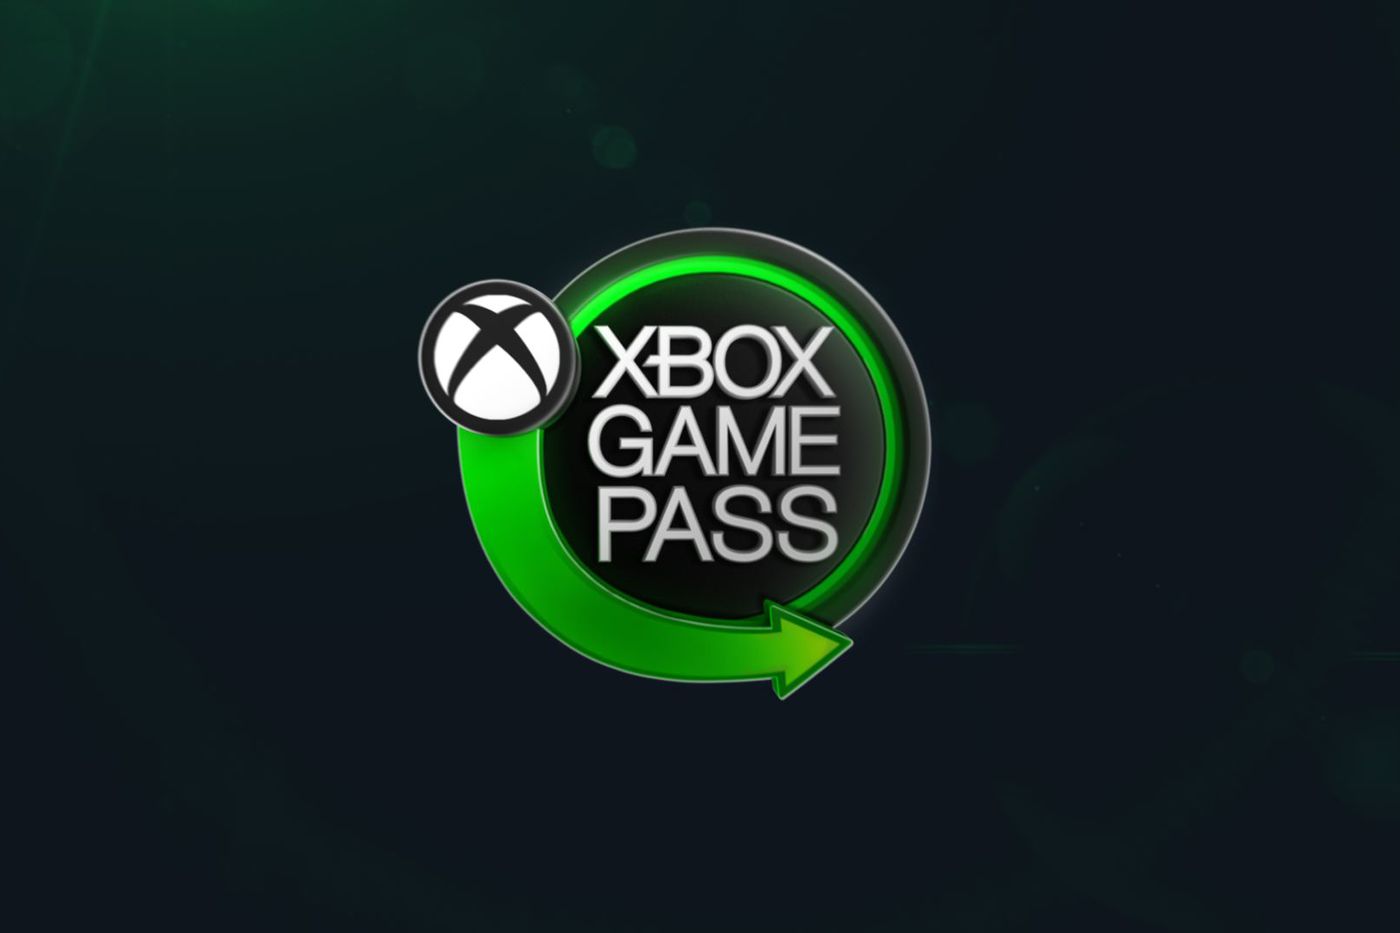 Xbox Game Pass vs PlayStation Now: Which Service is Better?